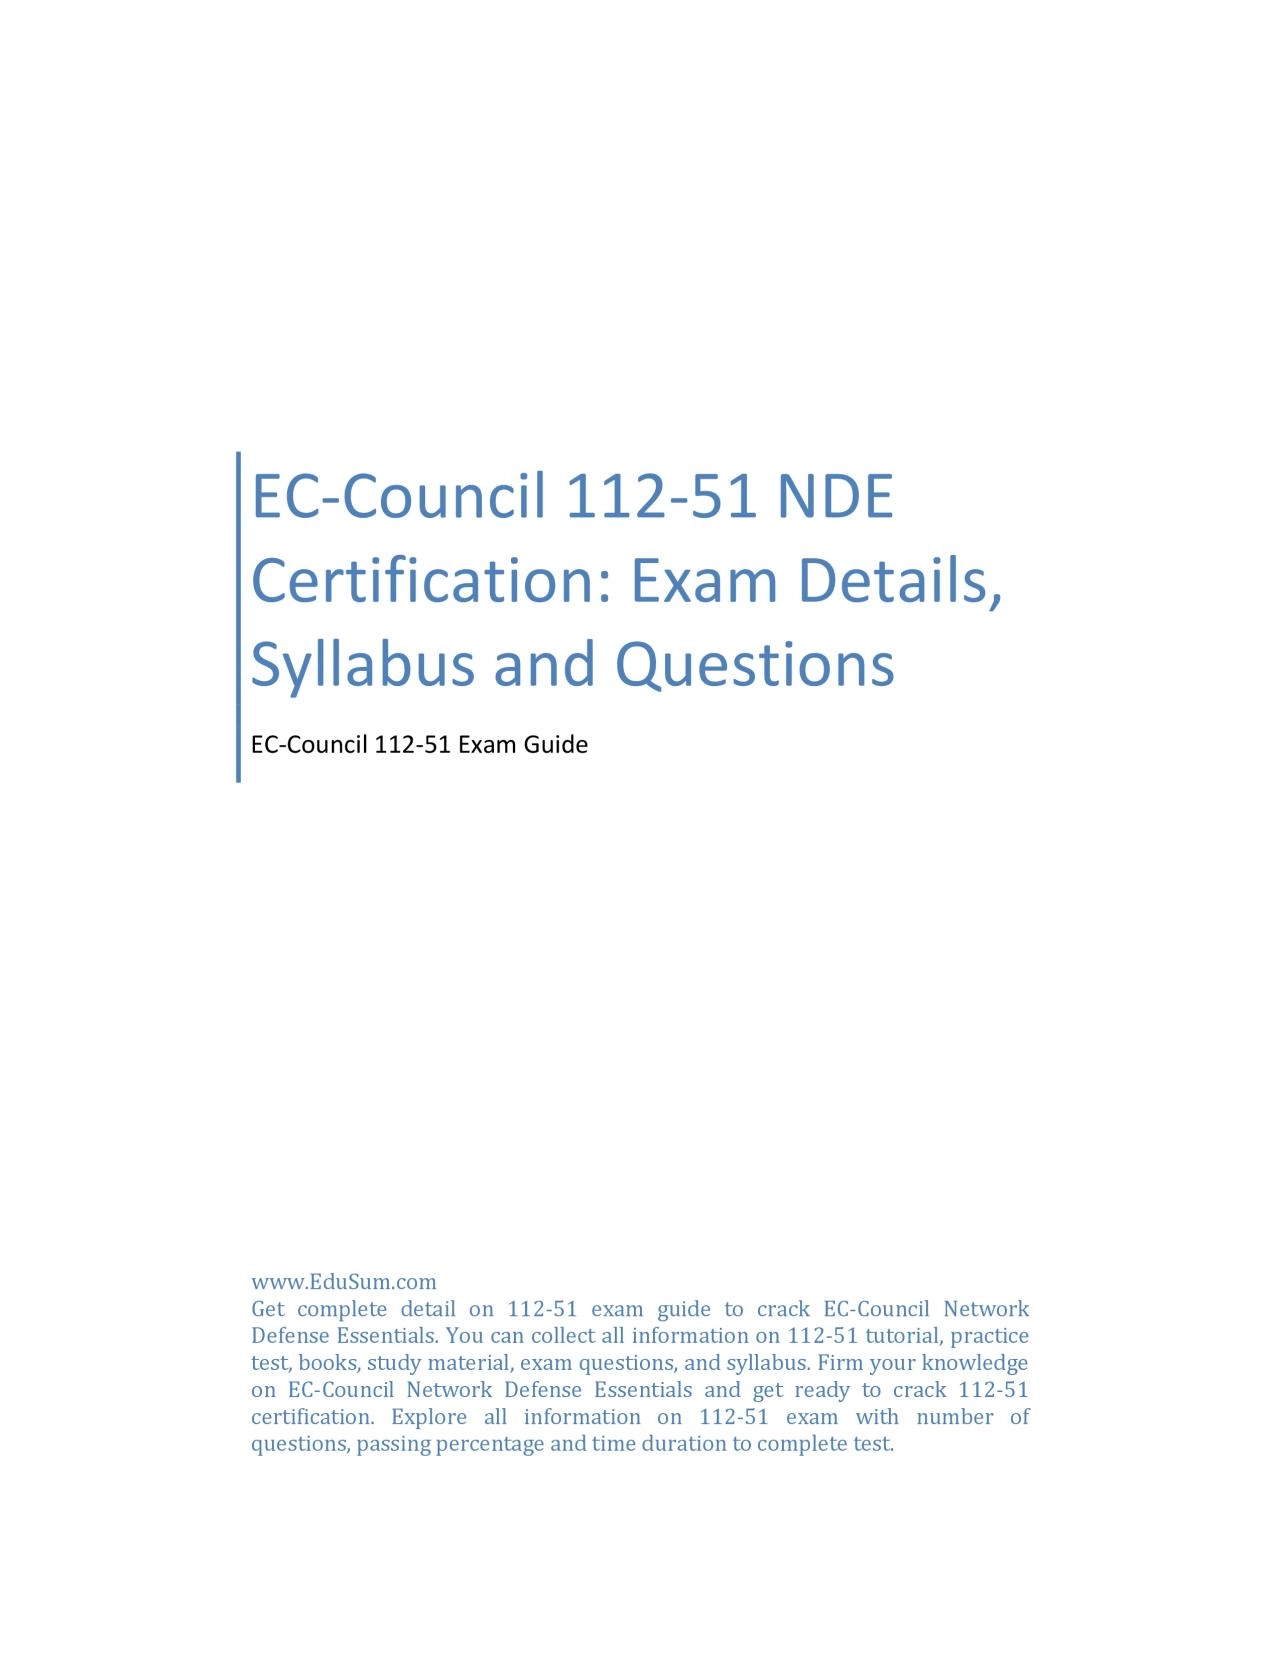 EC-Council 112-51 NDE Certification: Exam Details, Syllabus and Questions